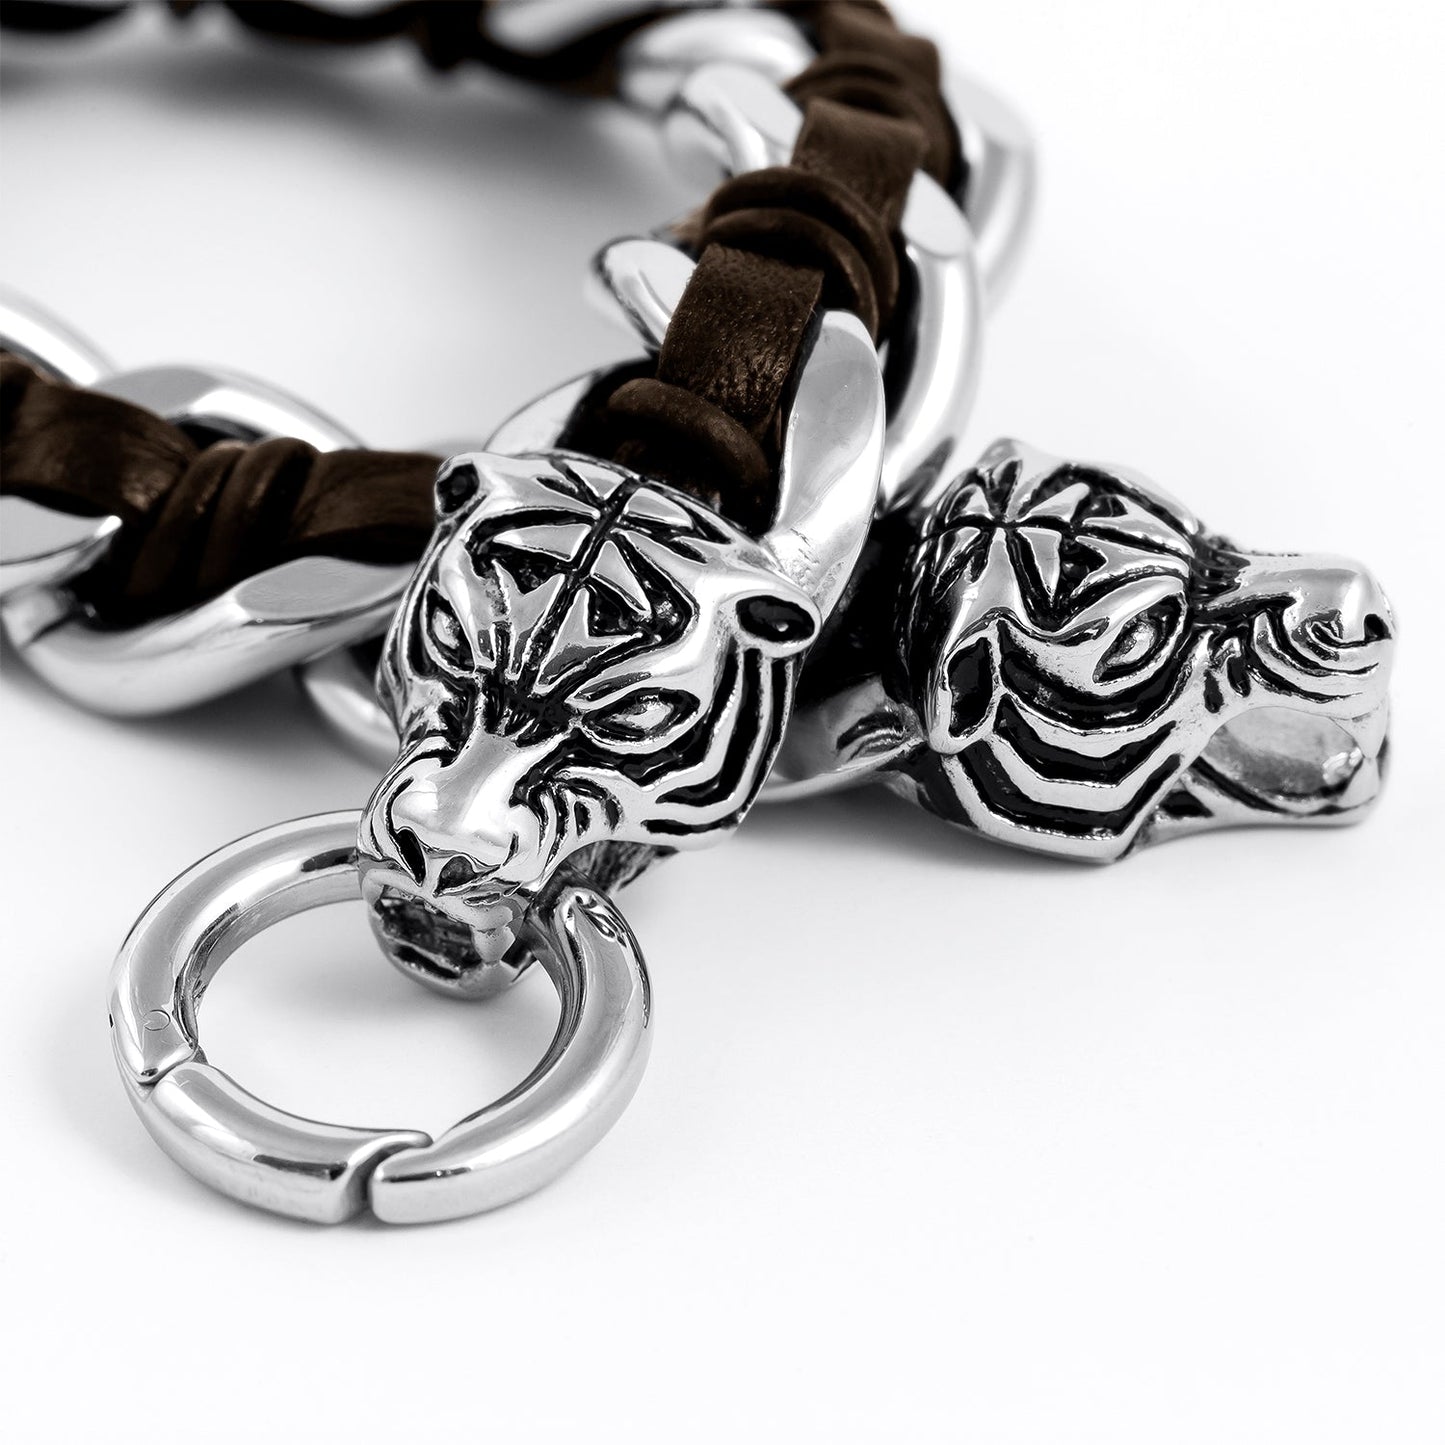 Heavy Stainless Steel Viking Tiger Head with Leather Bracelet - SilverMania925